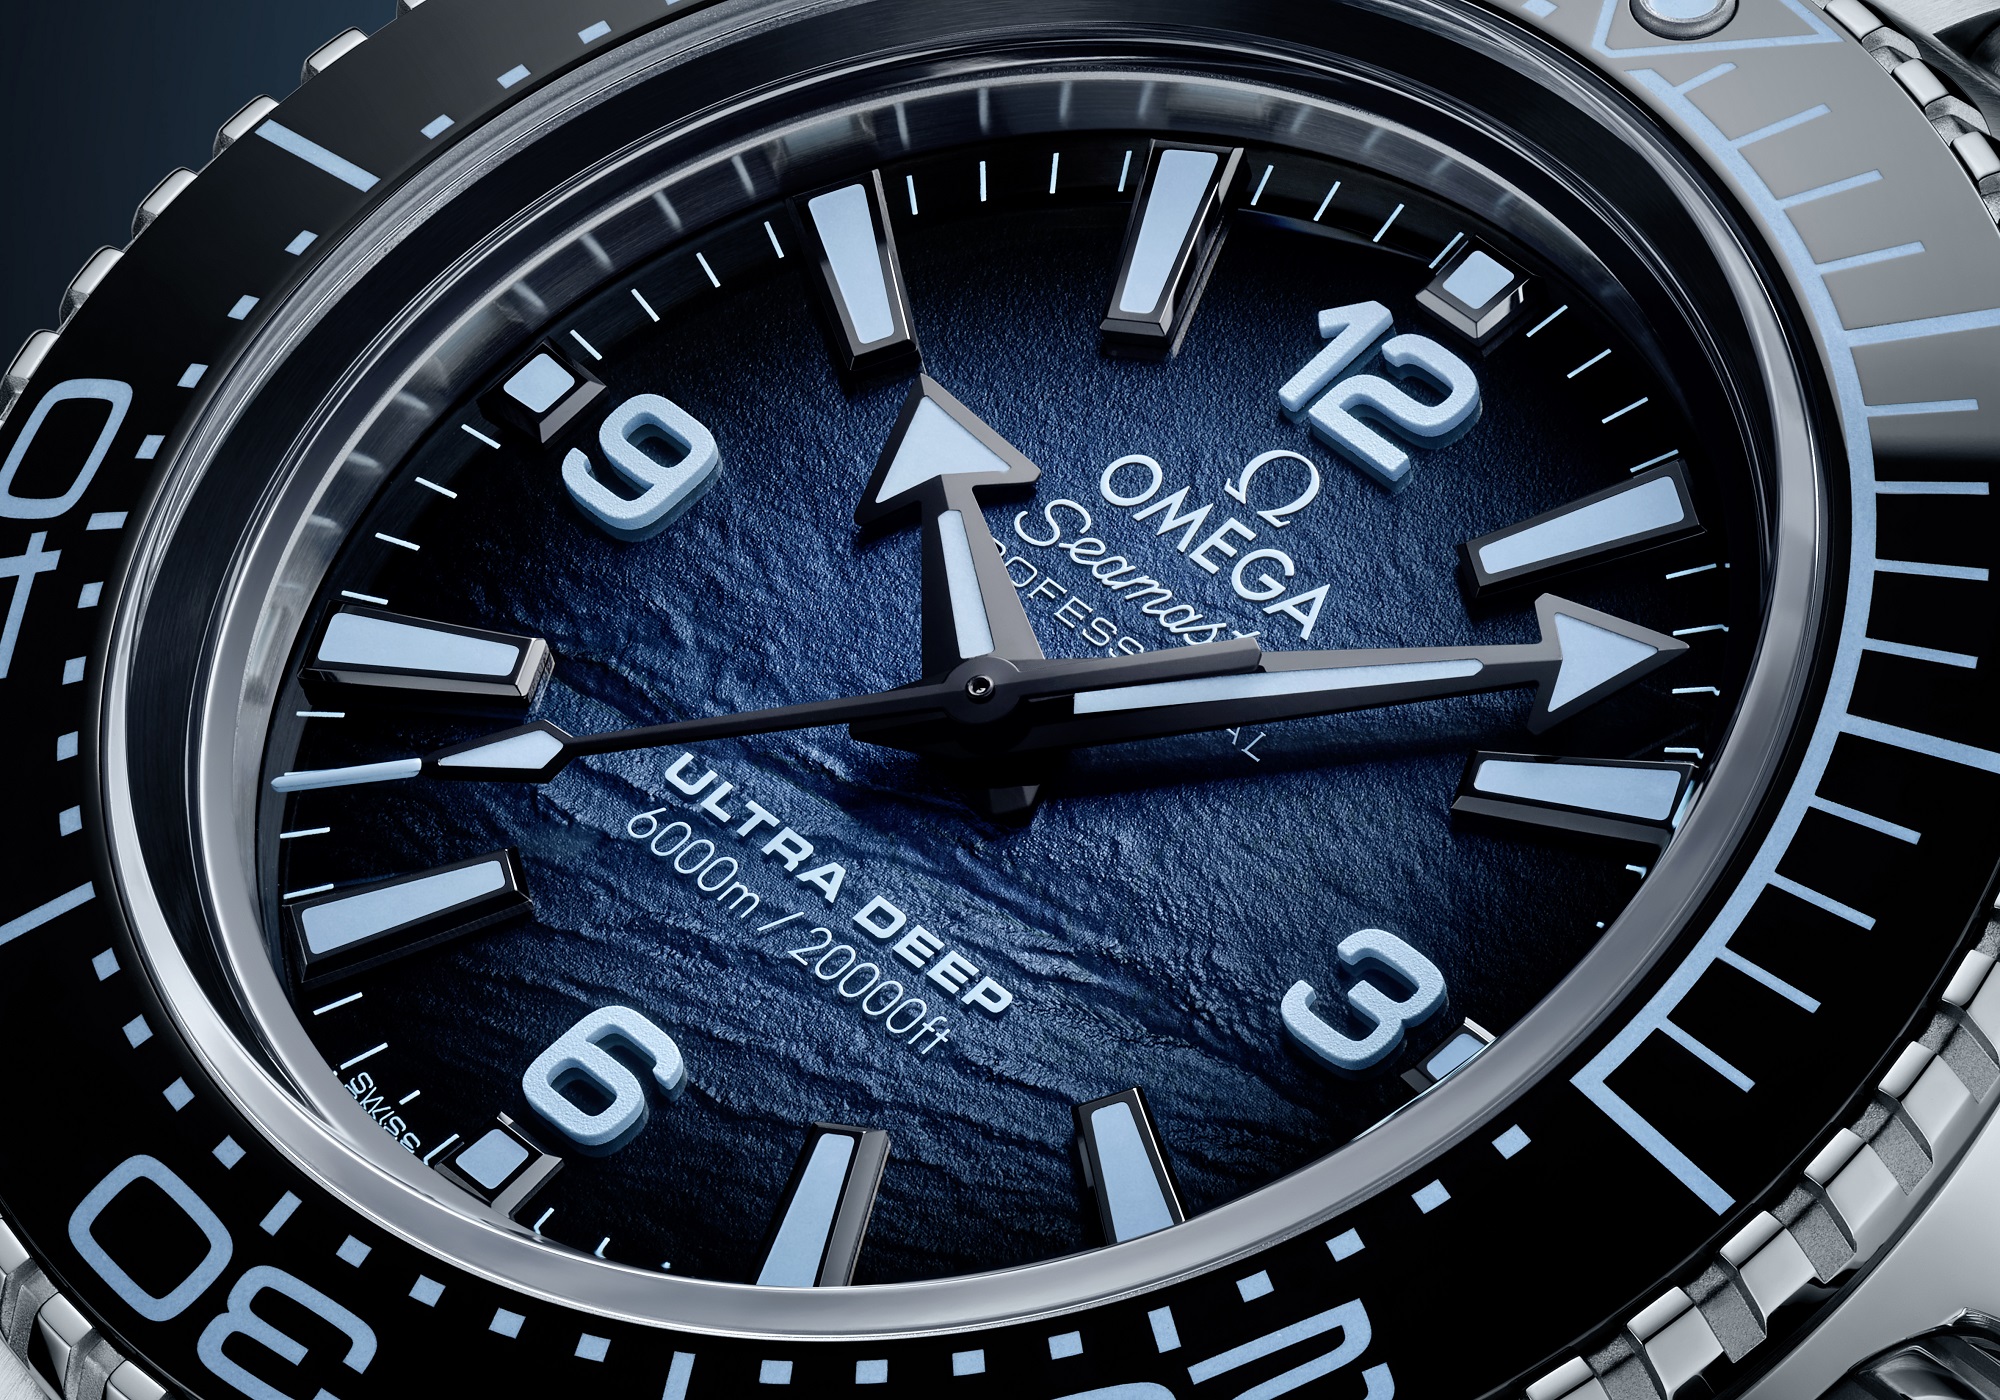 How to Use the Omega Seamaster 300M Clasp | SwissWatchExpo - YouTube